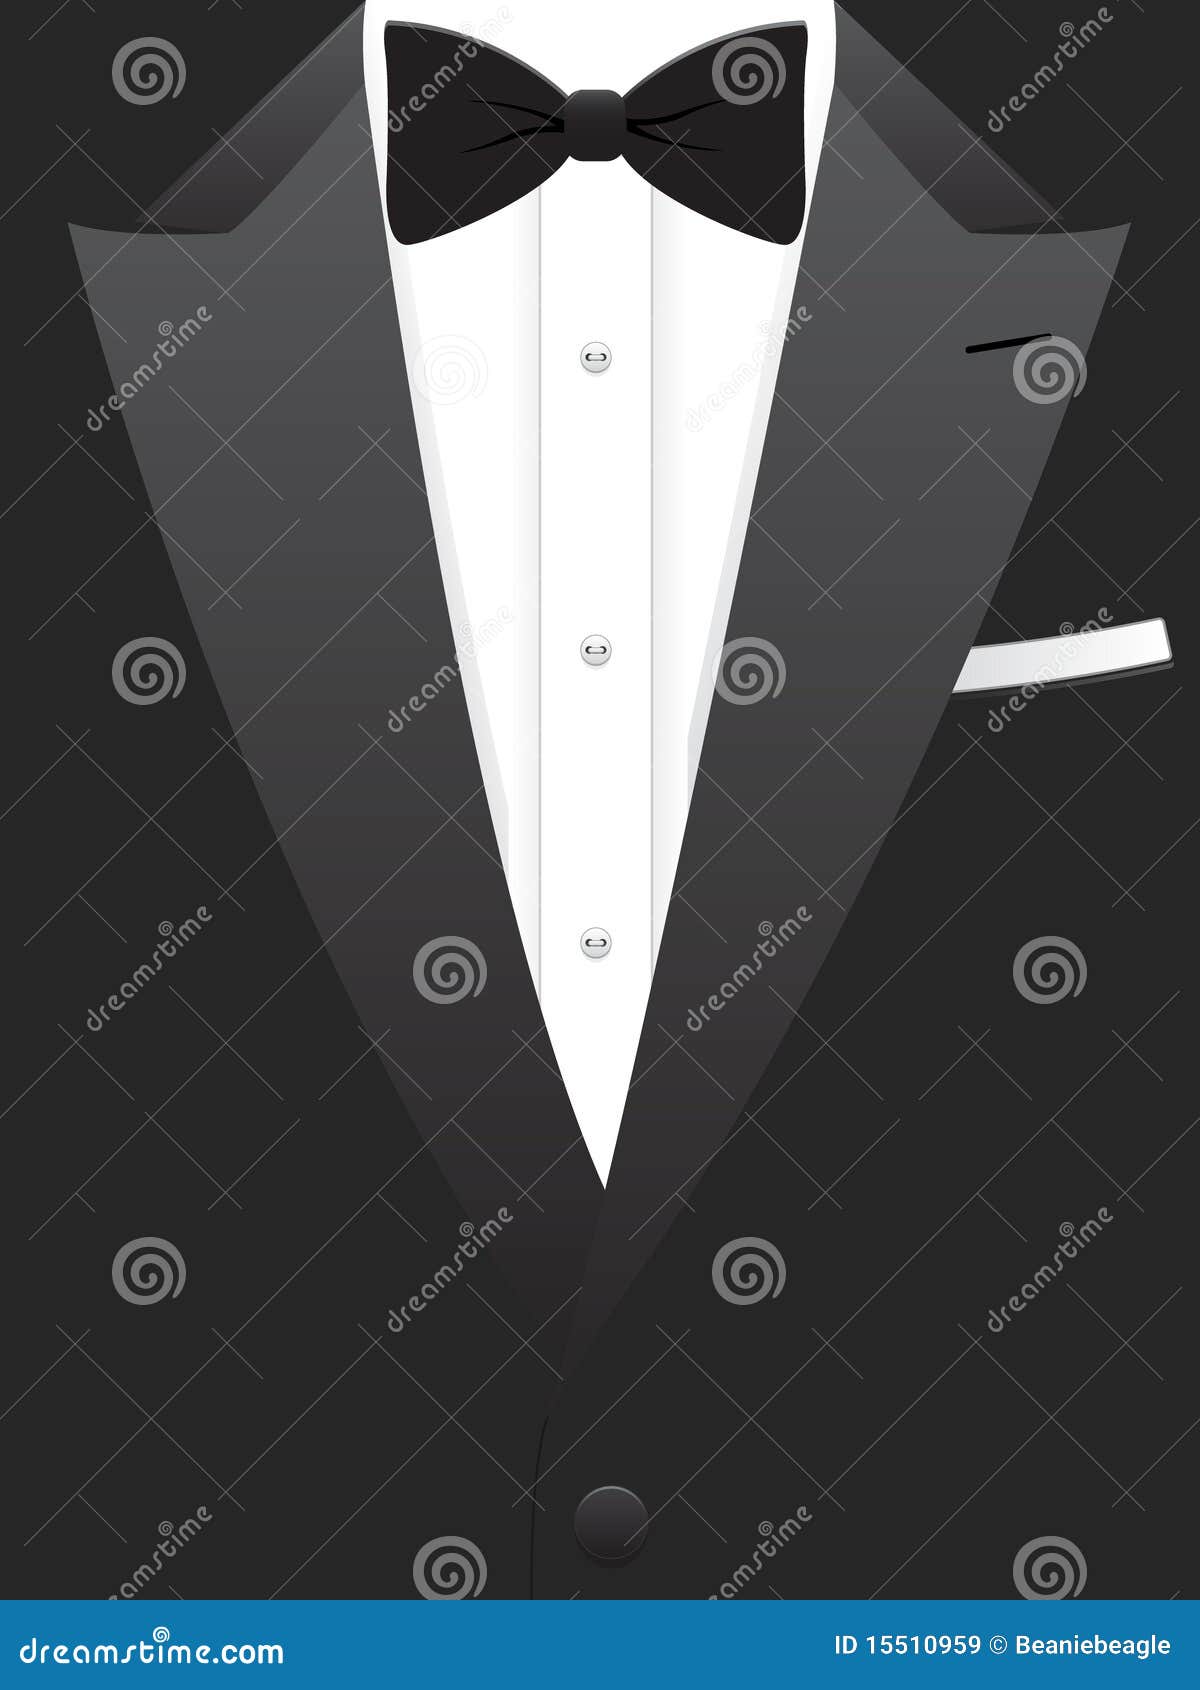 Tuxedo Cartoons, Illustrations & Vector Stock Images - 16271 Pictures ...